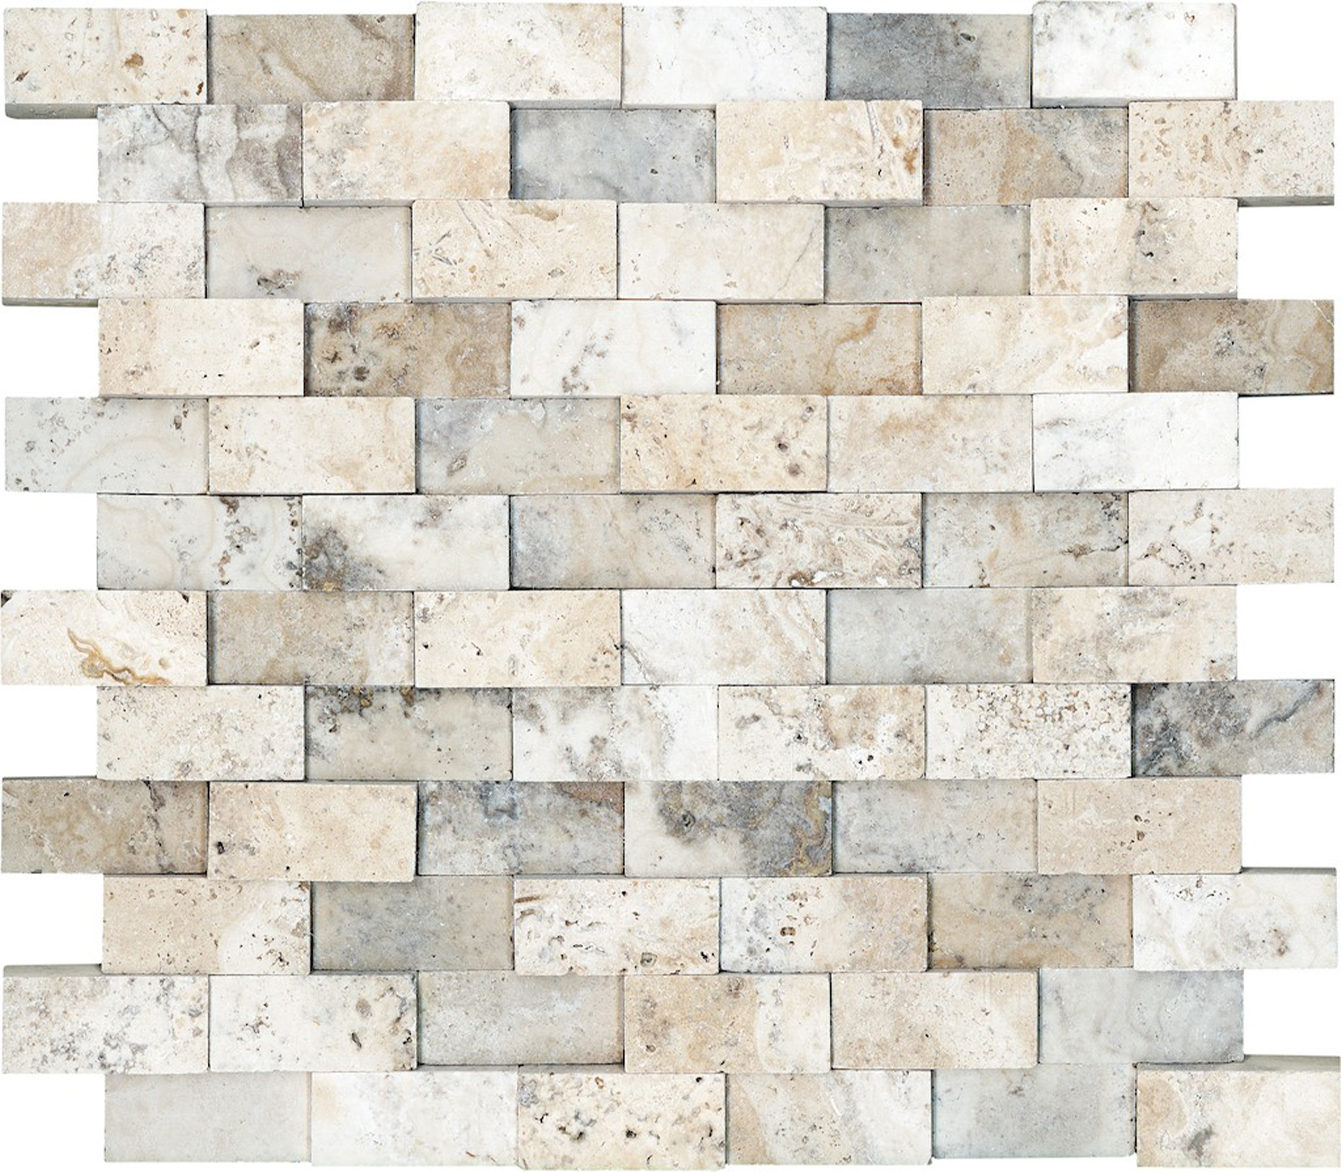 travertine brick offset 1x2-inch pattern natural stone mosaic from picasso anatolia collection distributed by surface group international honed finish straight edge edge mesh shape